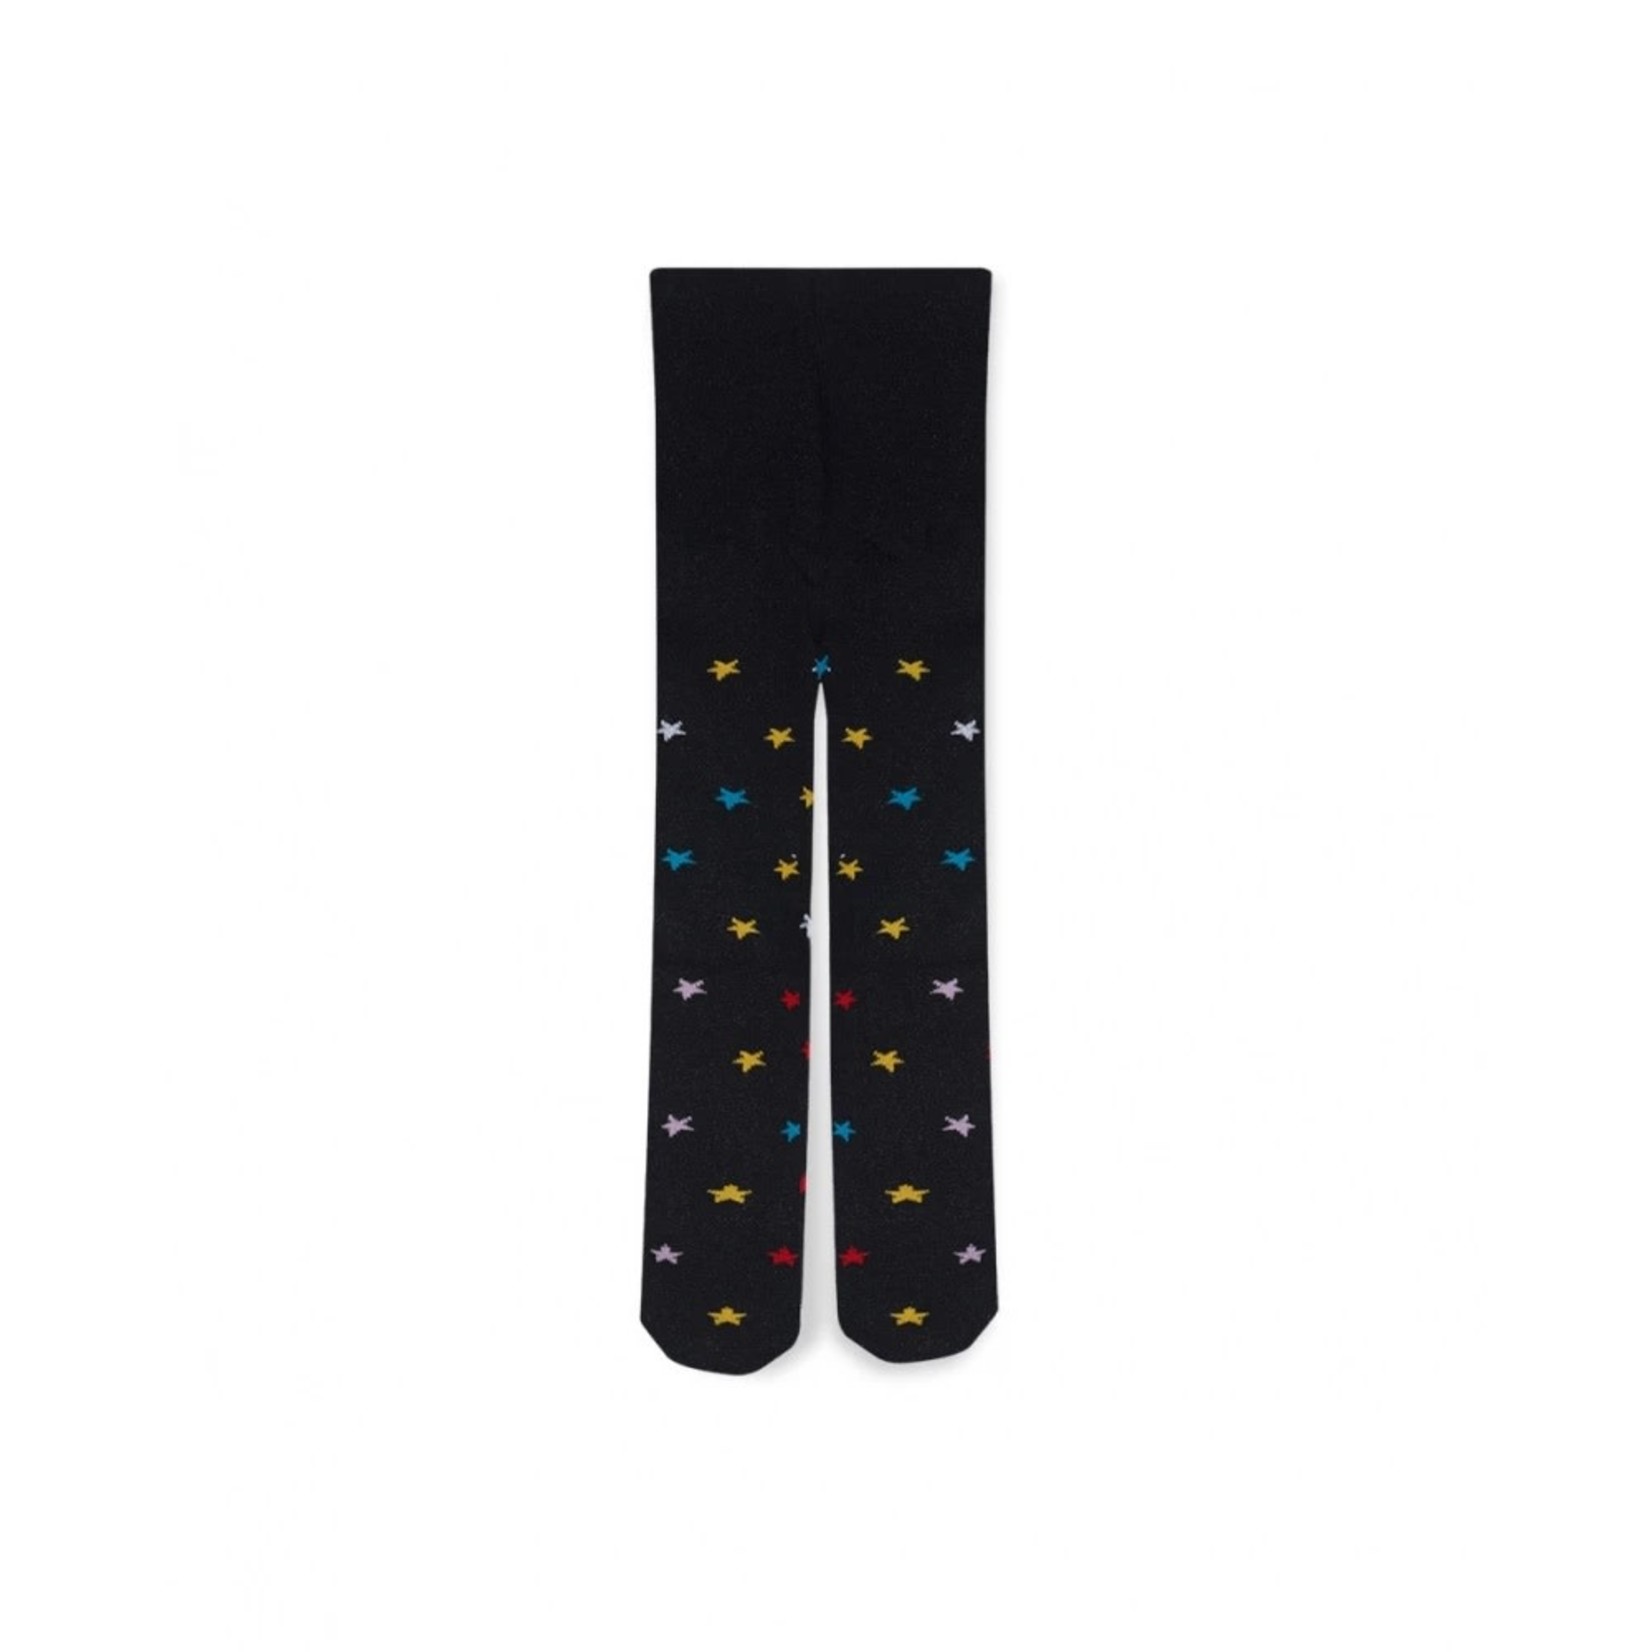 TucTuc TUC TUC - Sparkling Black Tights with Stars Pattern 'Glam Rock'